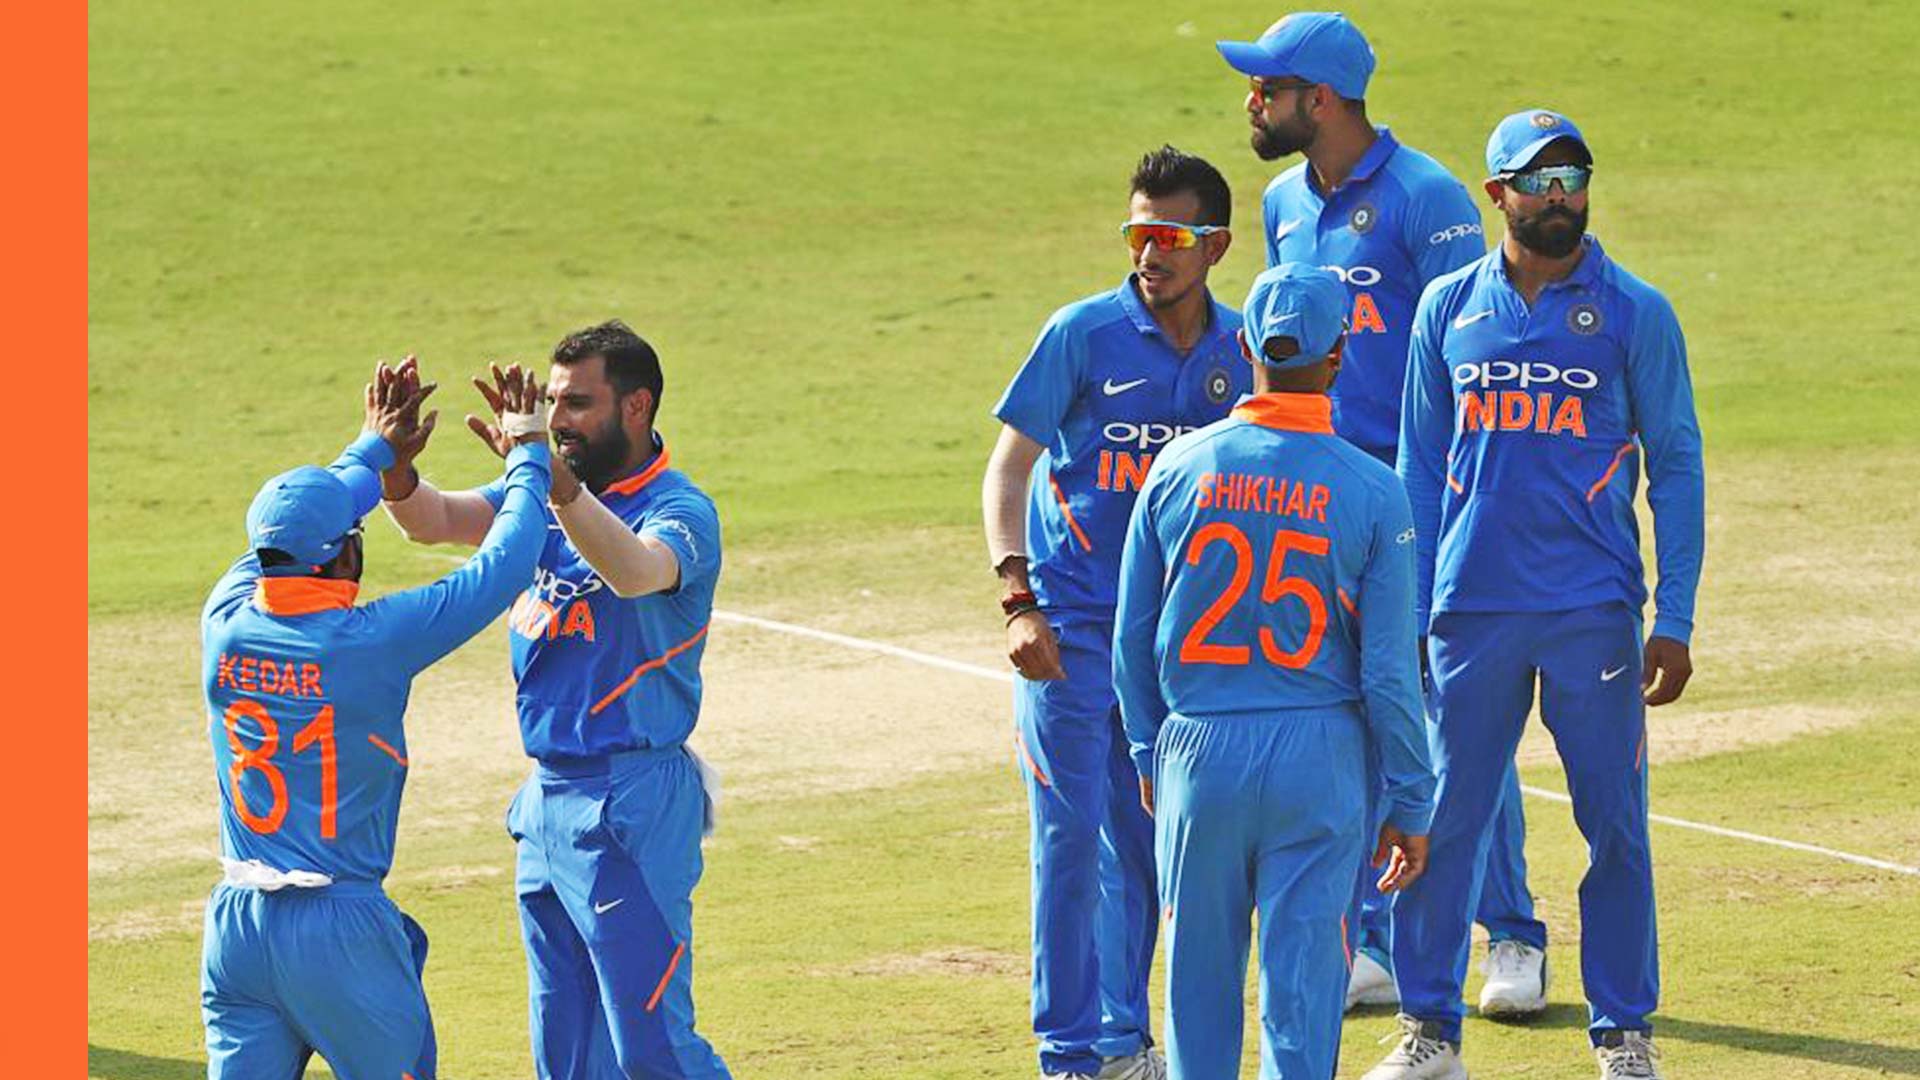 Indian team for World Cup 2019: Full Indian squad for the ICC Cricket World Cup 2019